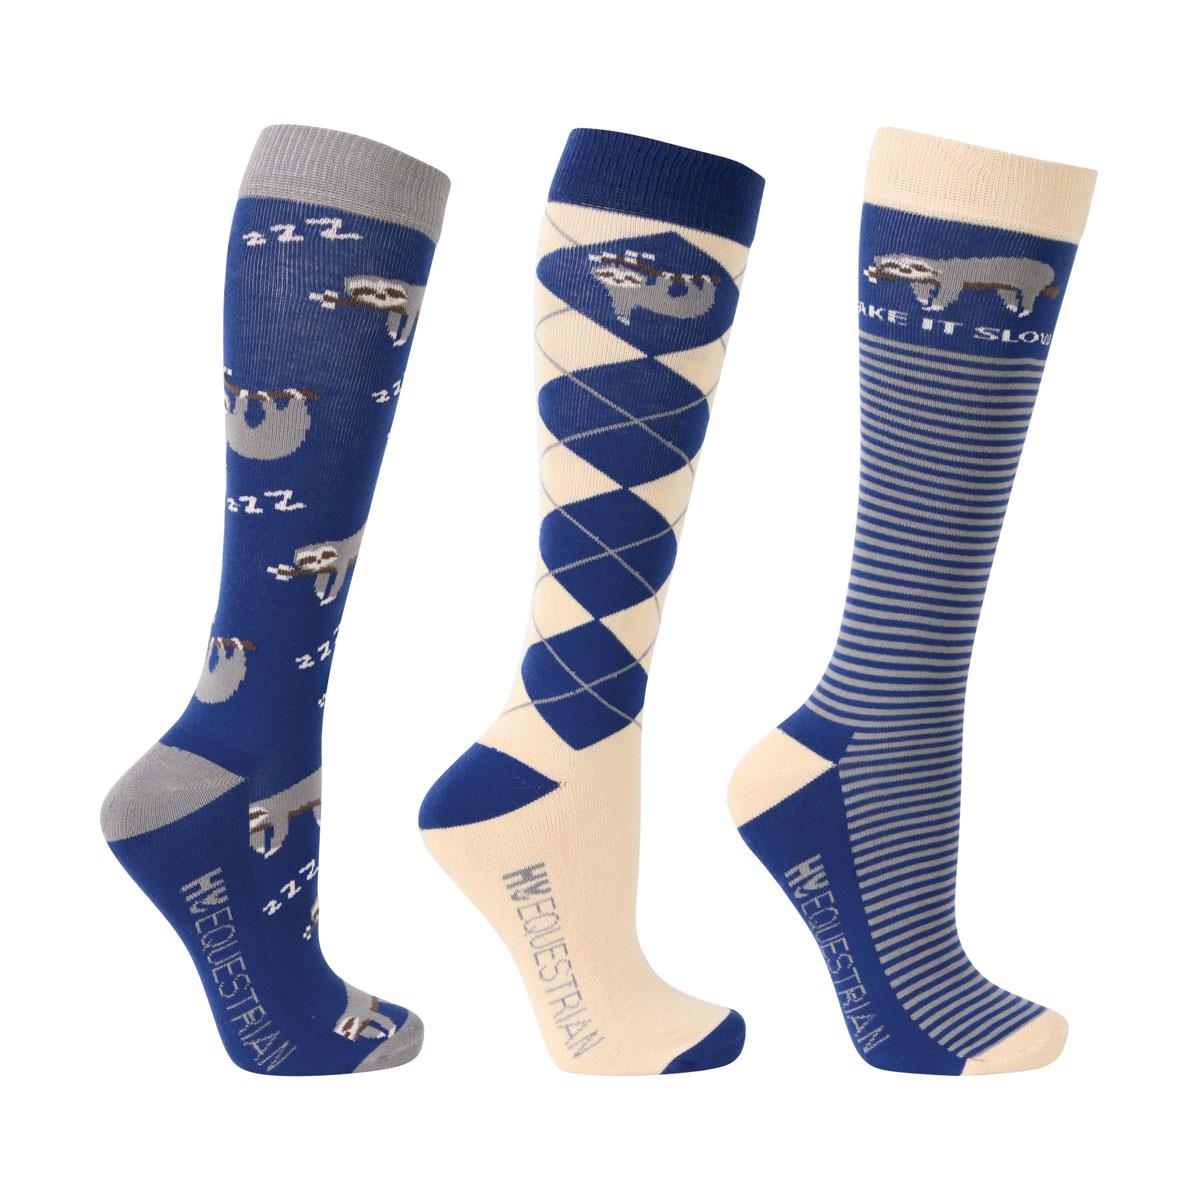 Hy Equestrian Slow Sloth Horse Riding Socks (Pack of 3) - Just Horse Riders